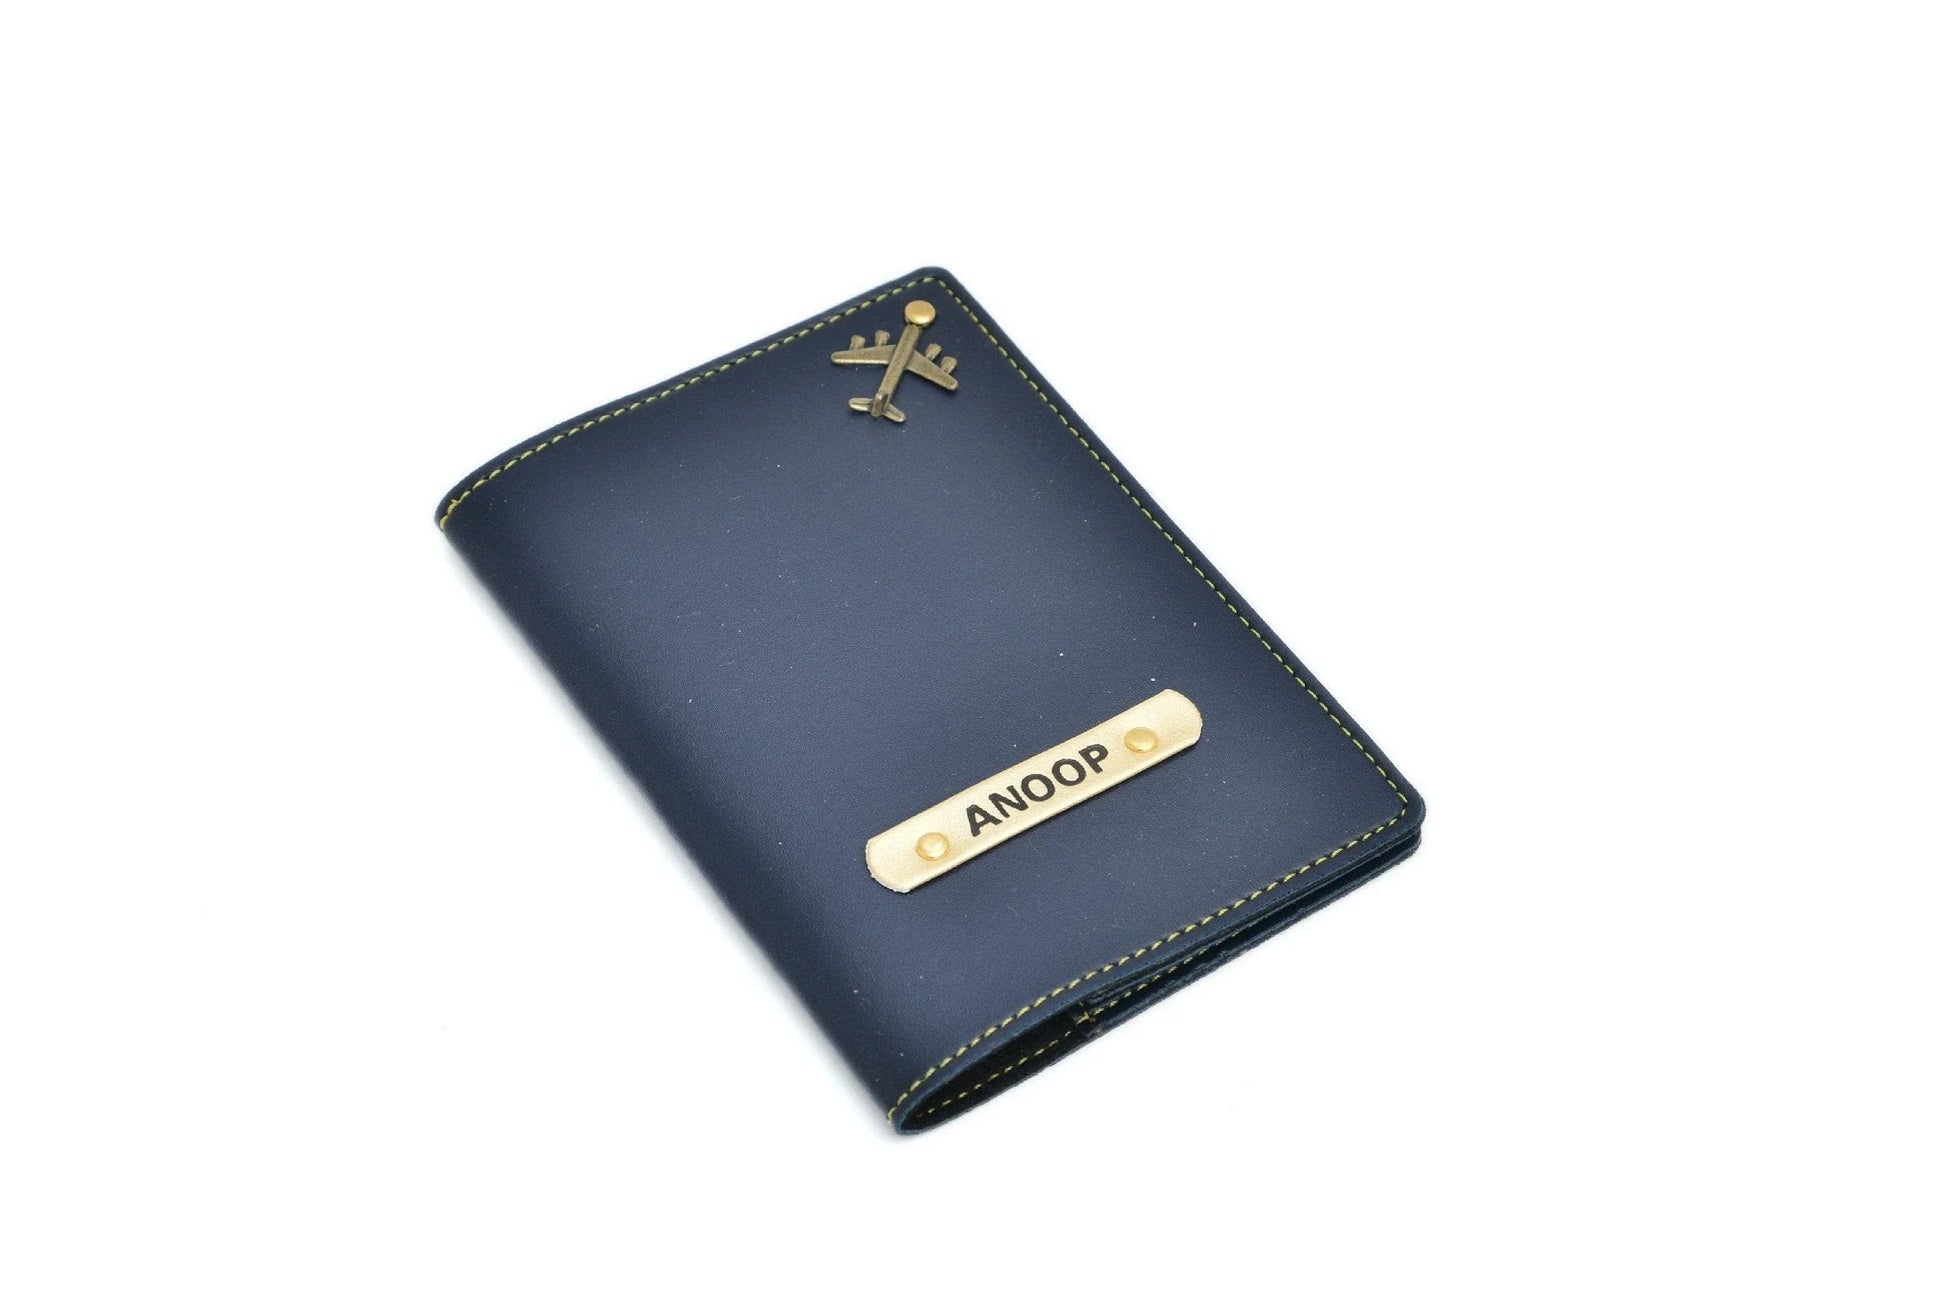 personalized-cb08-royal-blue-customized-best-gift-for-boyfriend-girlfriend.A must-have travel accessory for today's minimalist traveler who seeks both style and function. With a personalized touch, it has your name and charm on it with its attractive finish.The case with its sturdy build ensures protection of your passport during traveling shenanigans! It carries your passport, money, cards etc. at one place. Material-vegan/synthetic leather